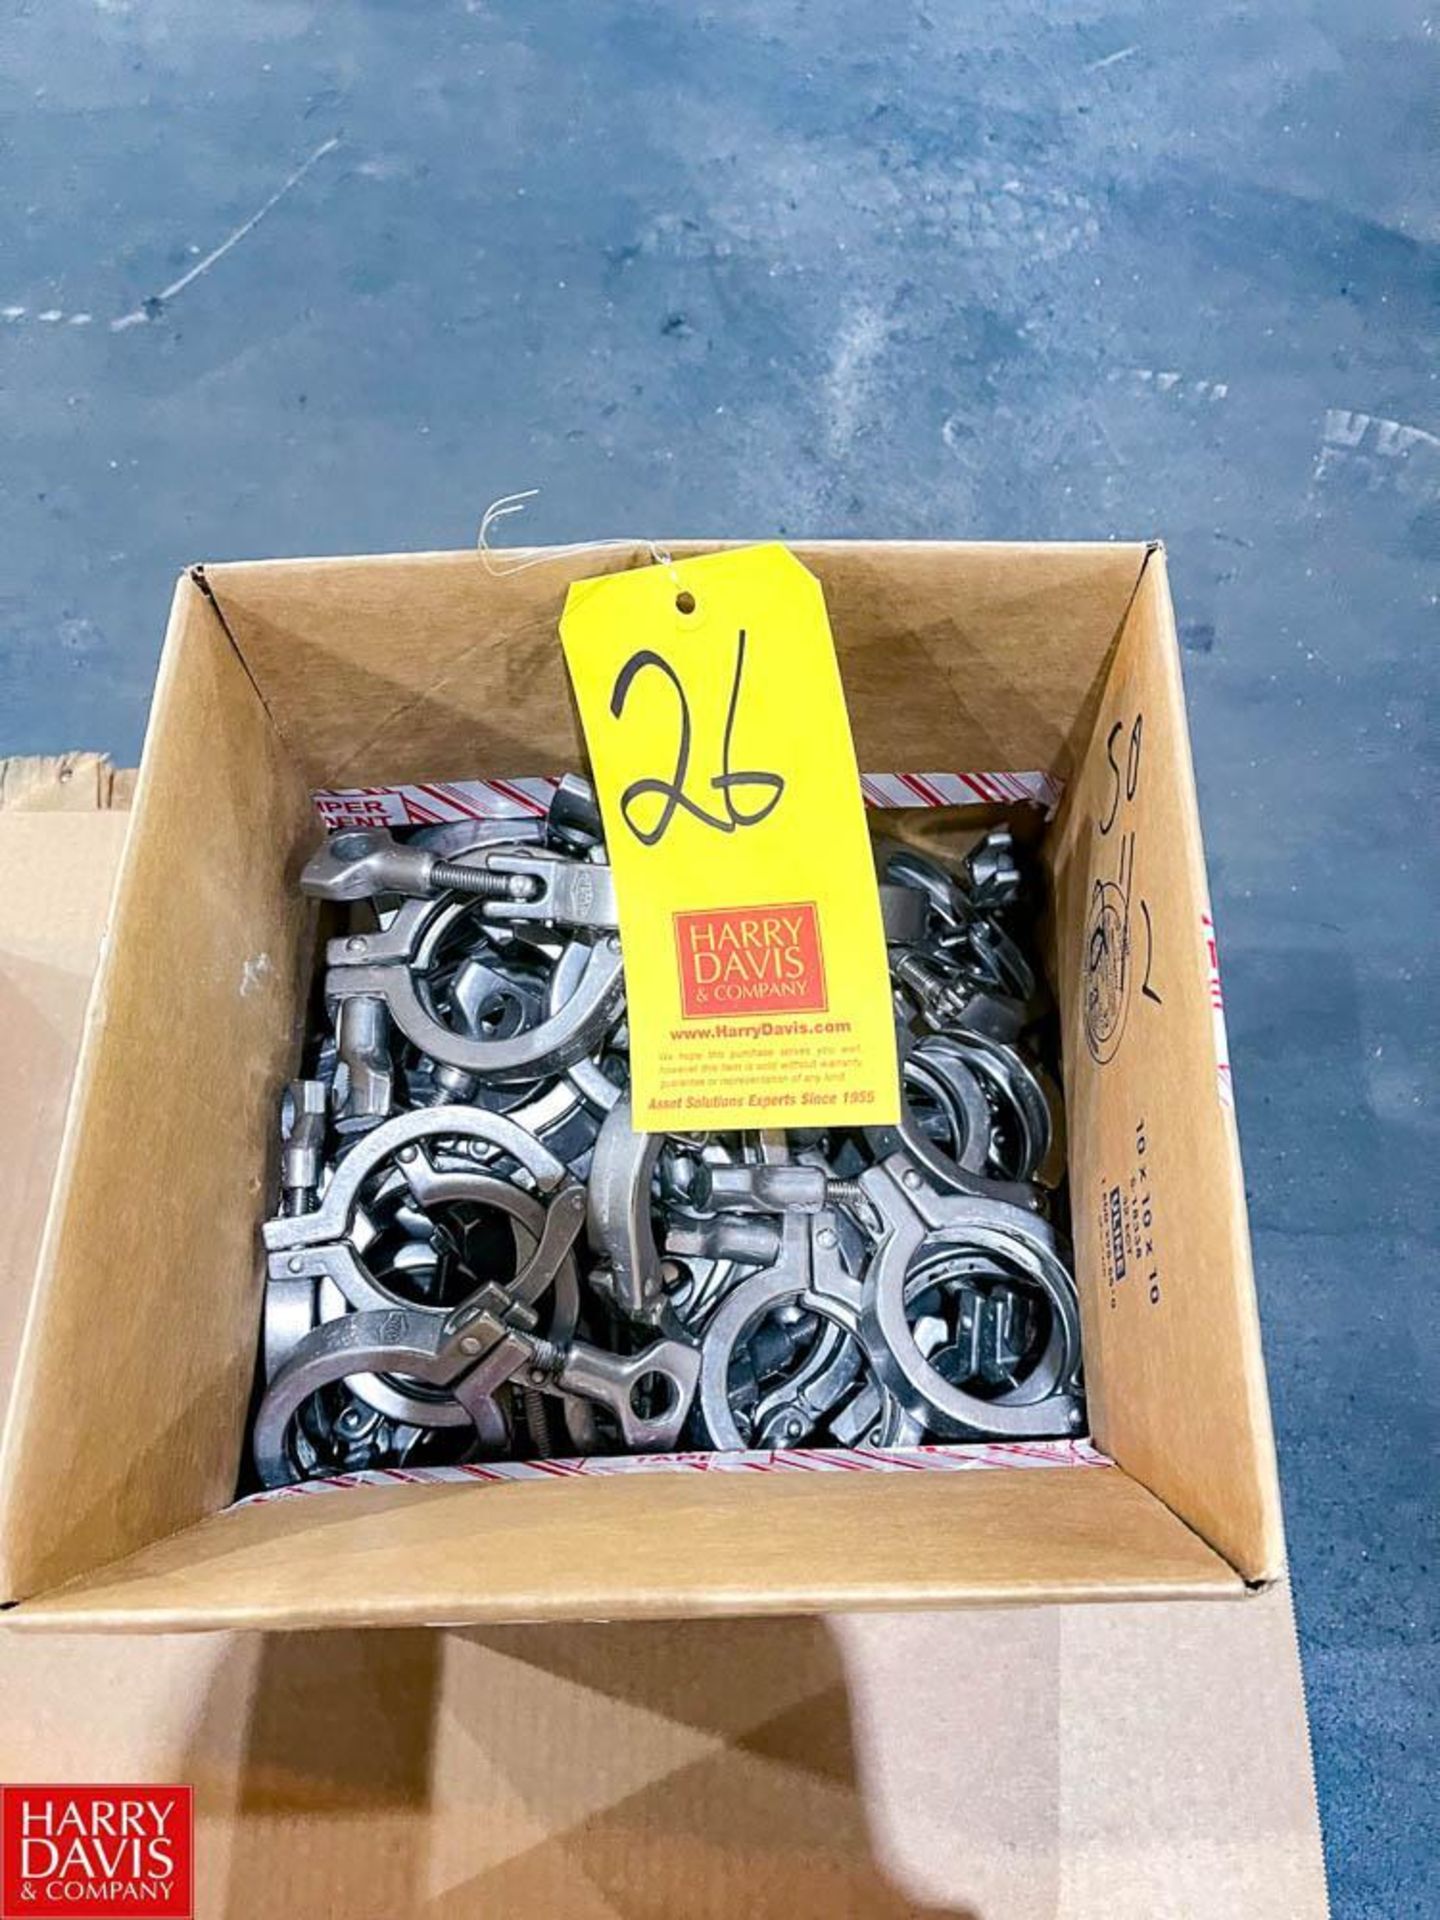 2.5" S/S Clamps - Rigging Fee: $25